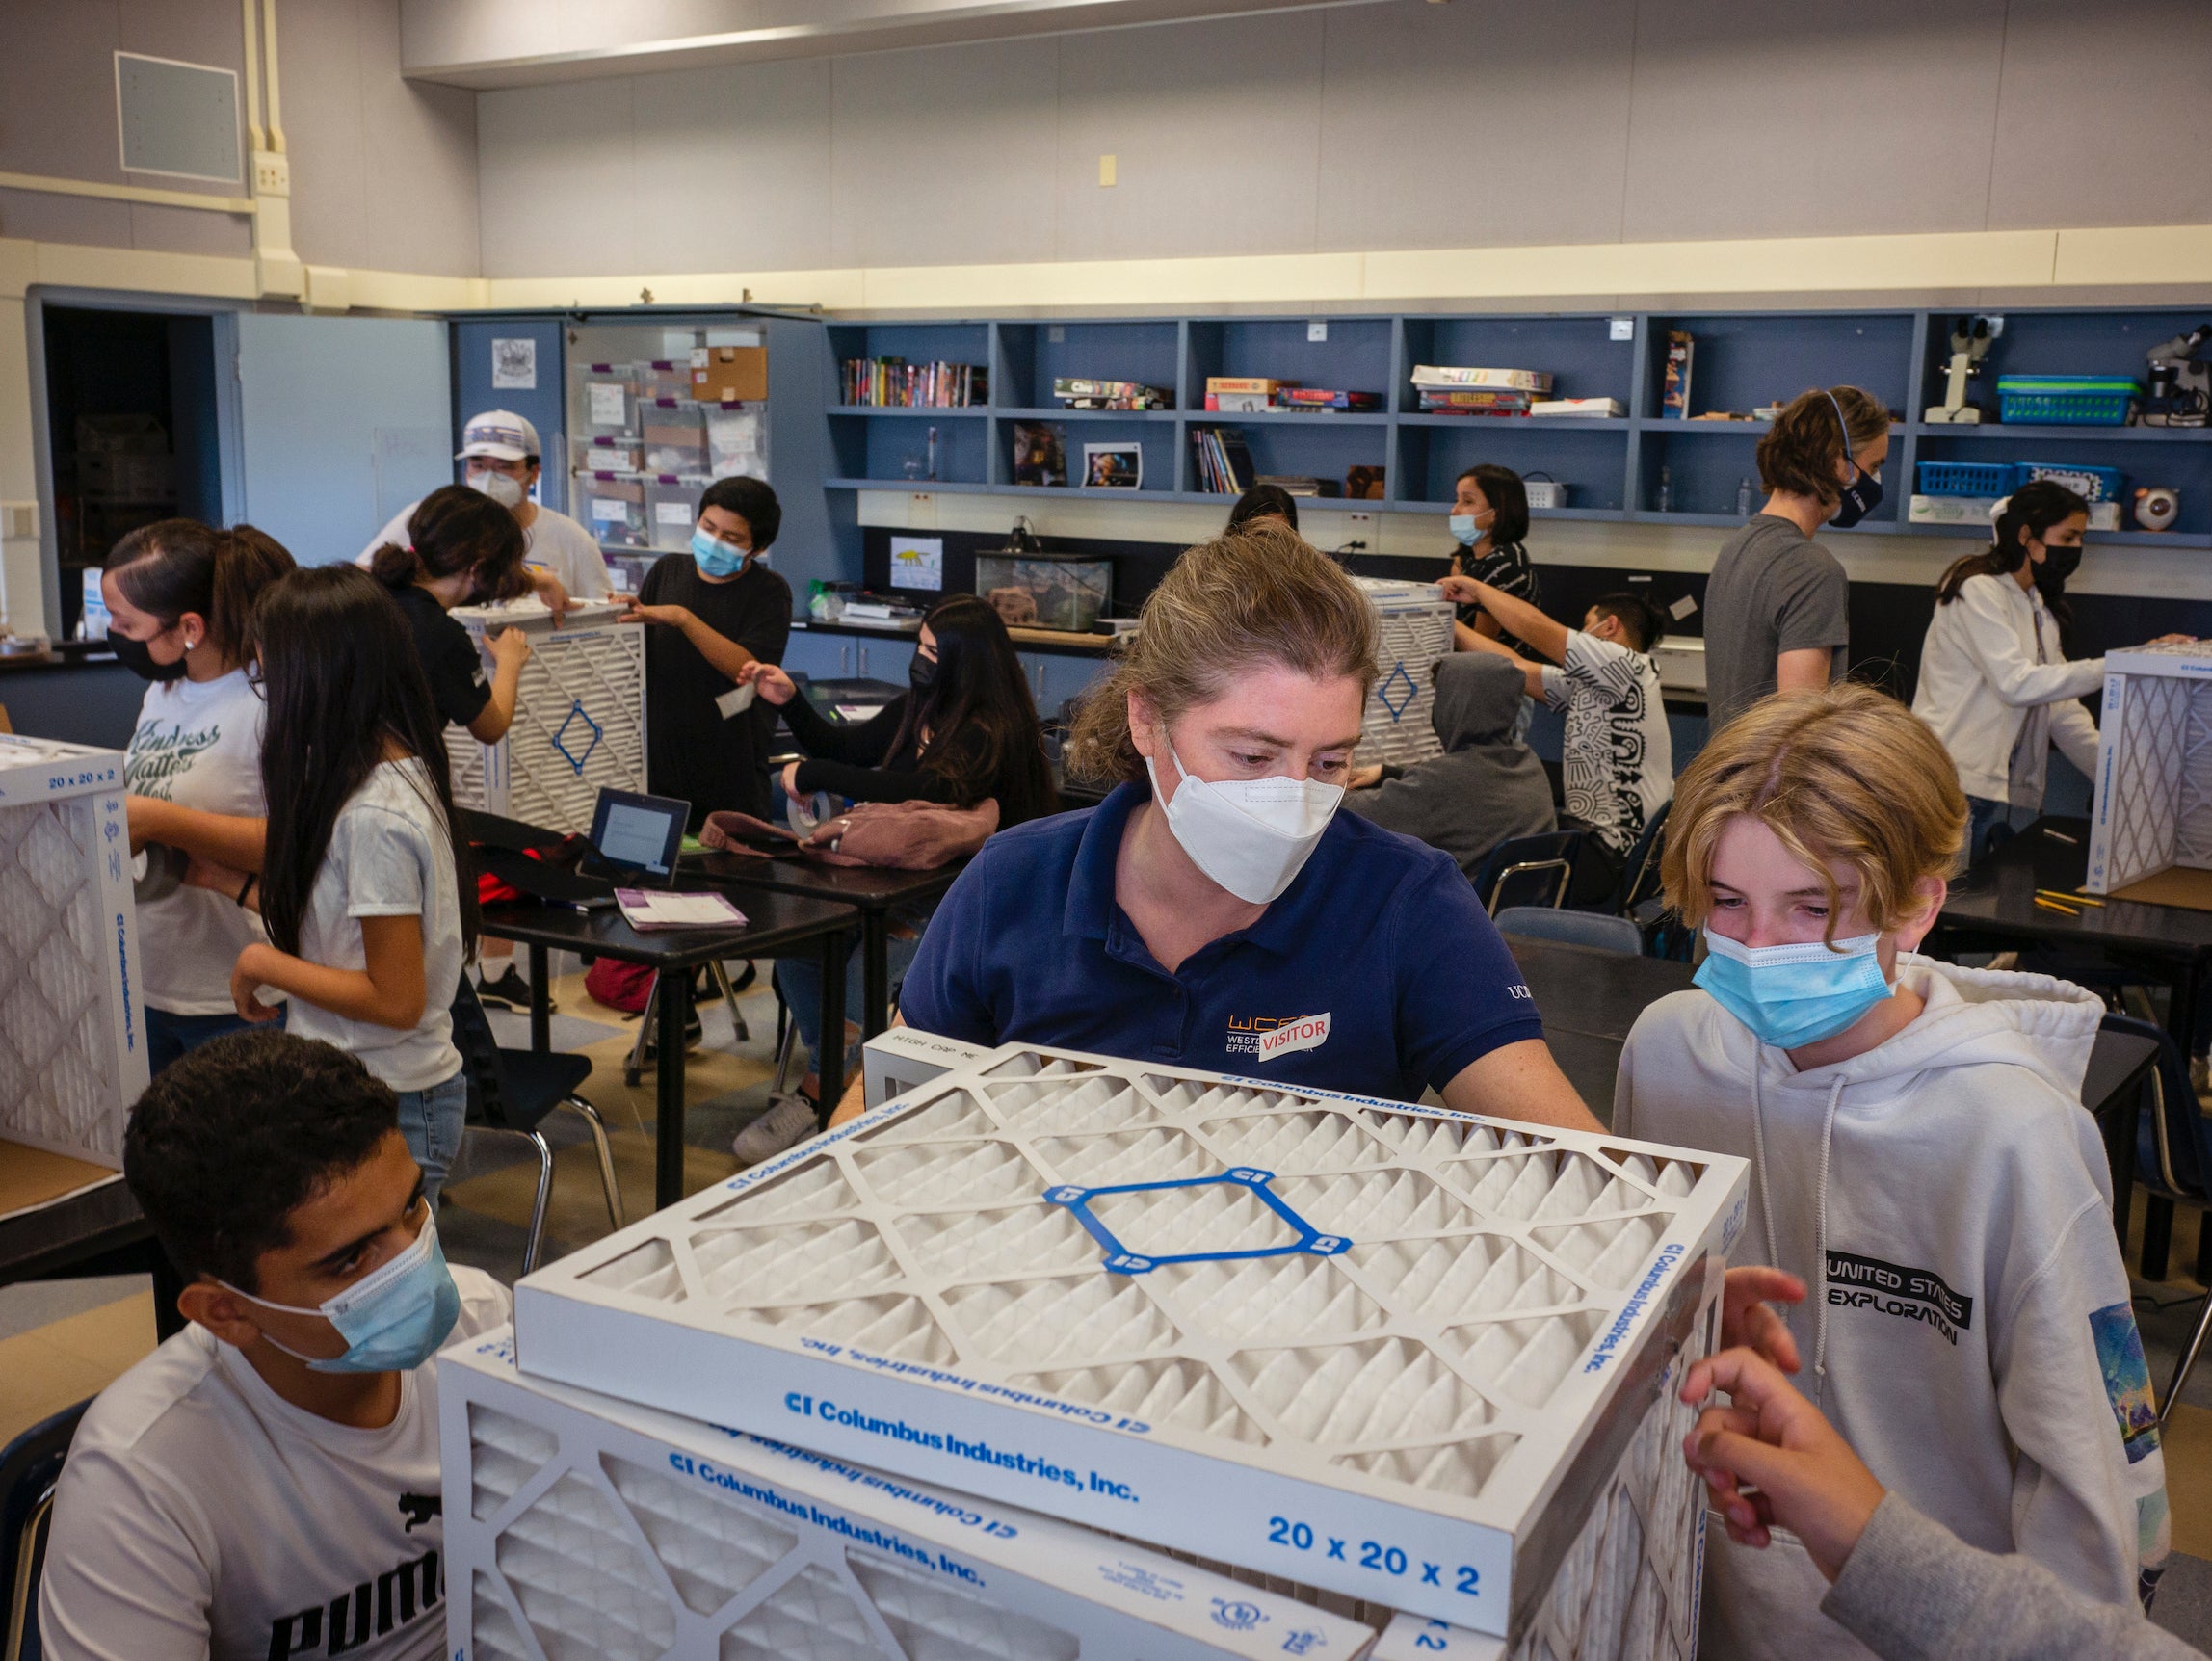 A woman scientist builds air purifier with junior high school students in a classroom